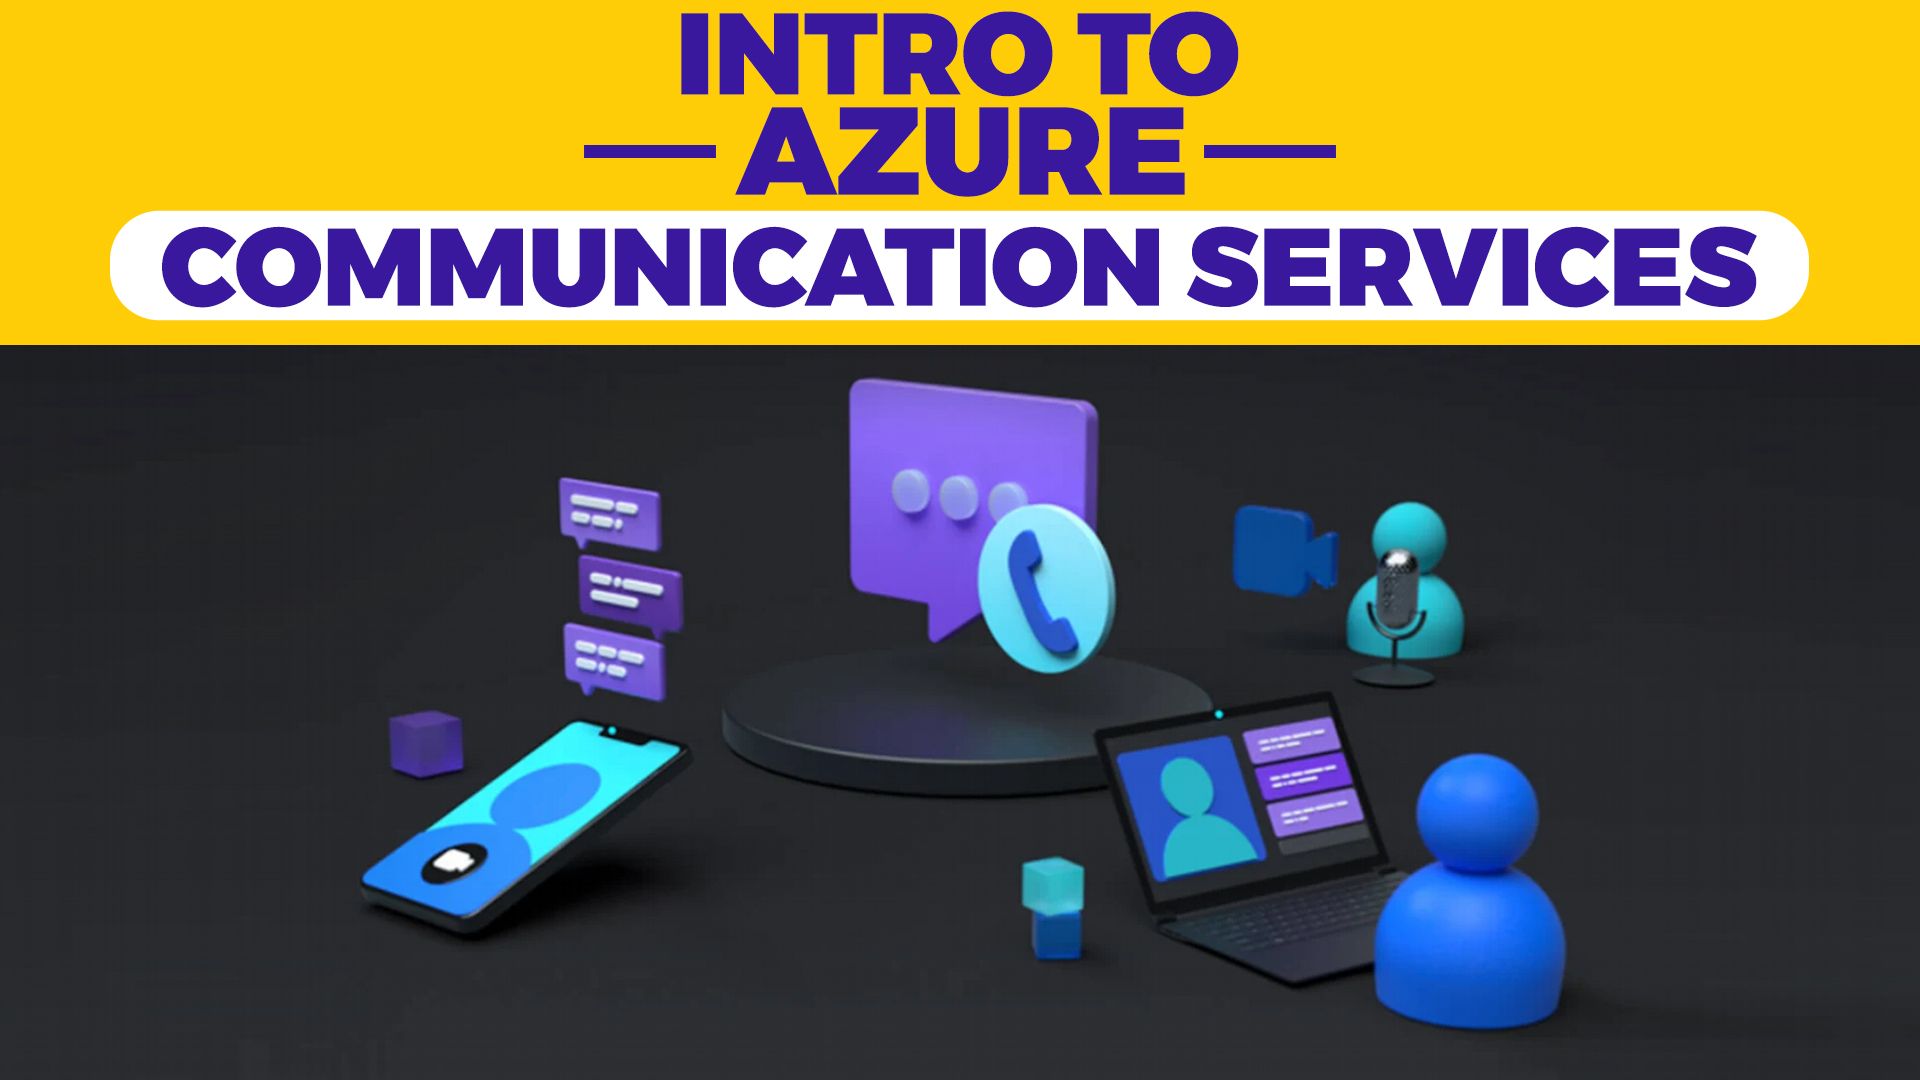 Intro to Azure Communication Services